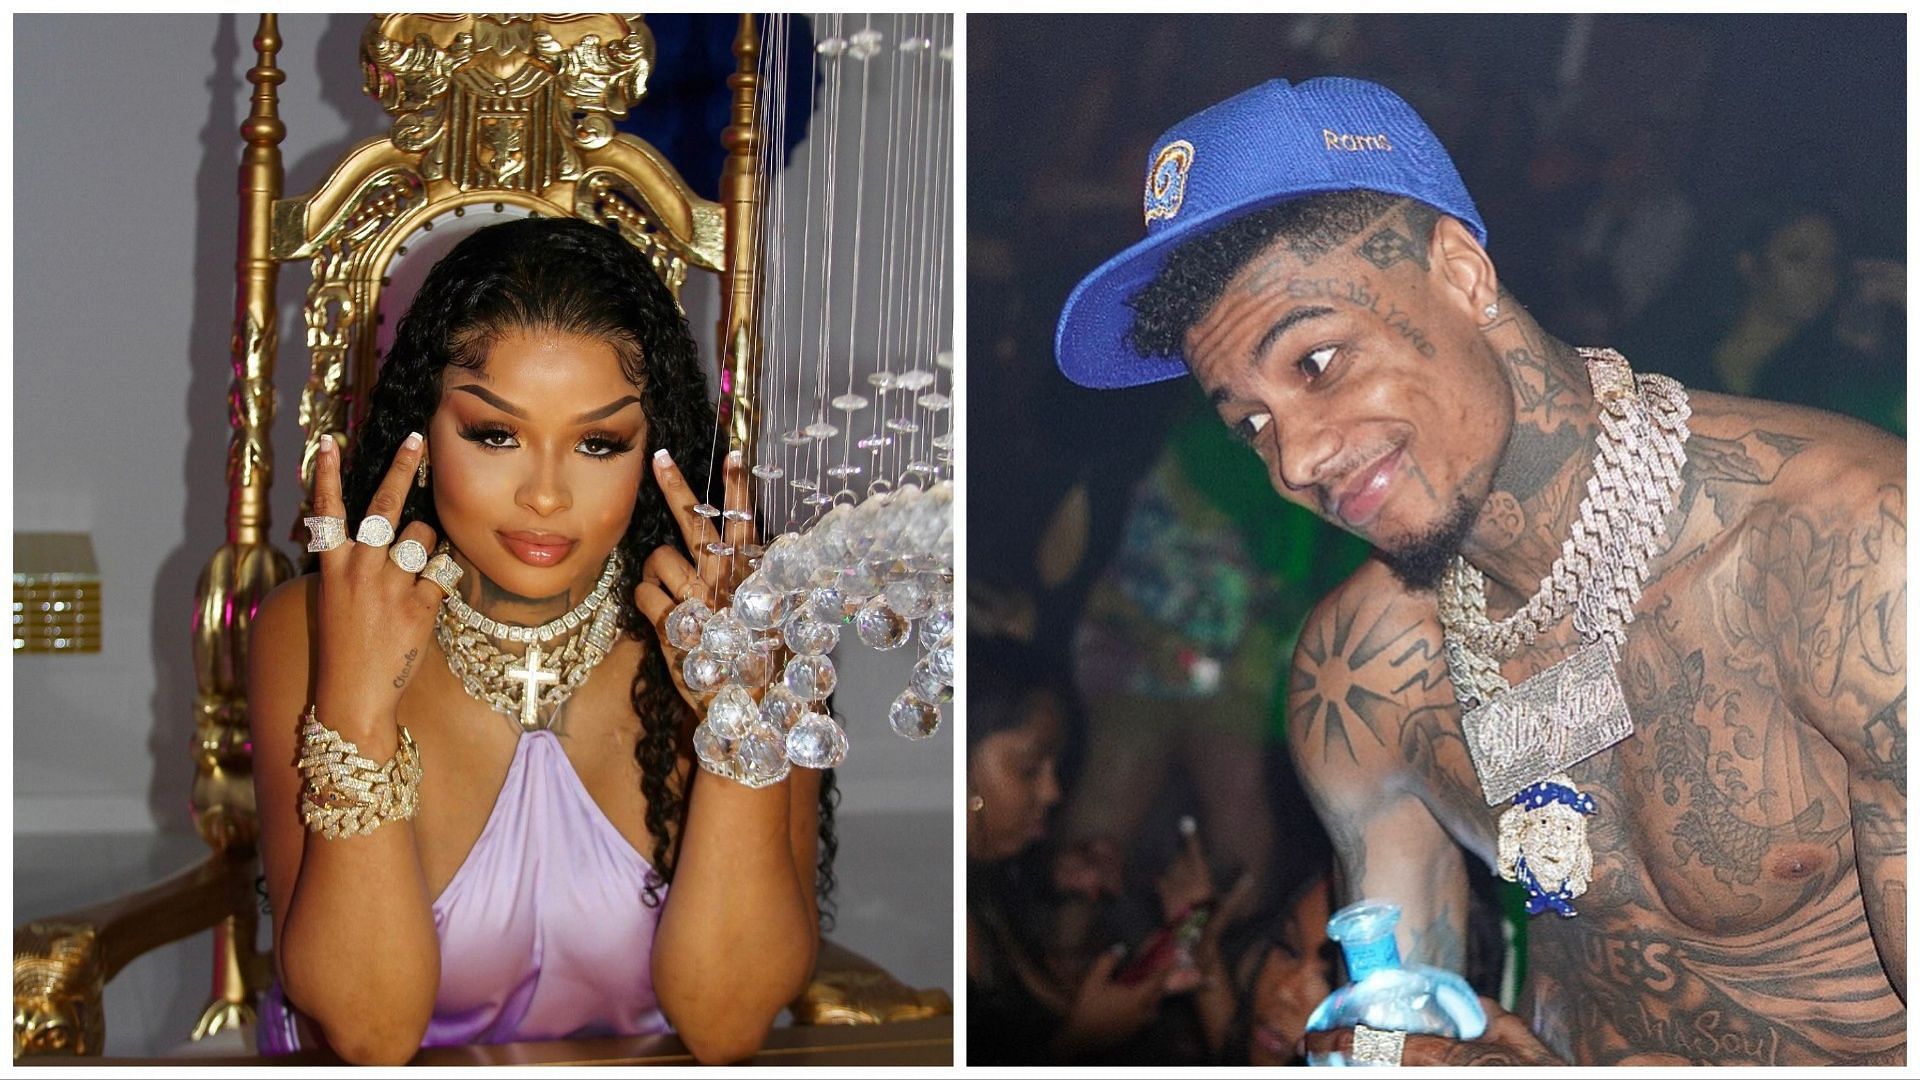 The math ain't mathing”: Chrisean Rock's response to Blueface saying he's not the father of her child after DNA test sparks wild reactions online